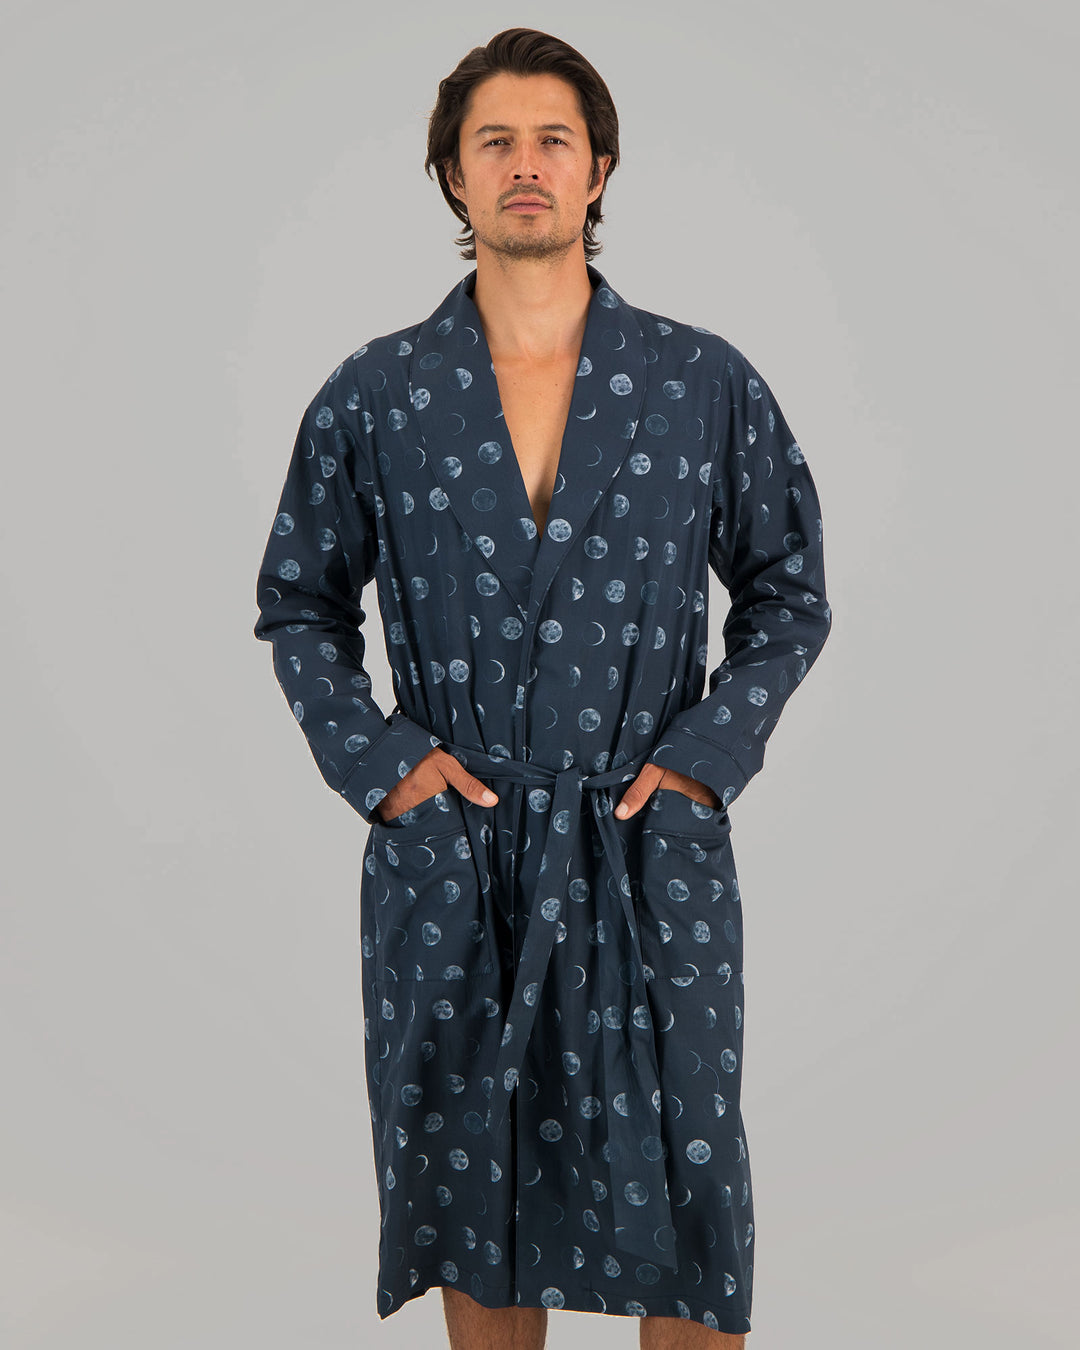 Mens Gown Moons Front - Woodstock Laundry